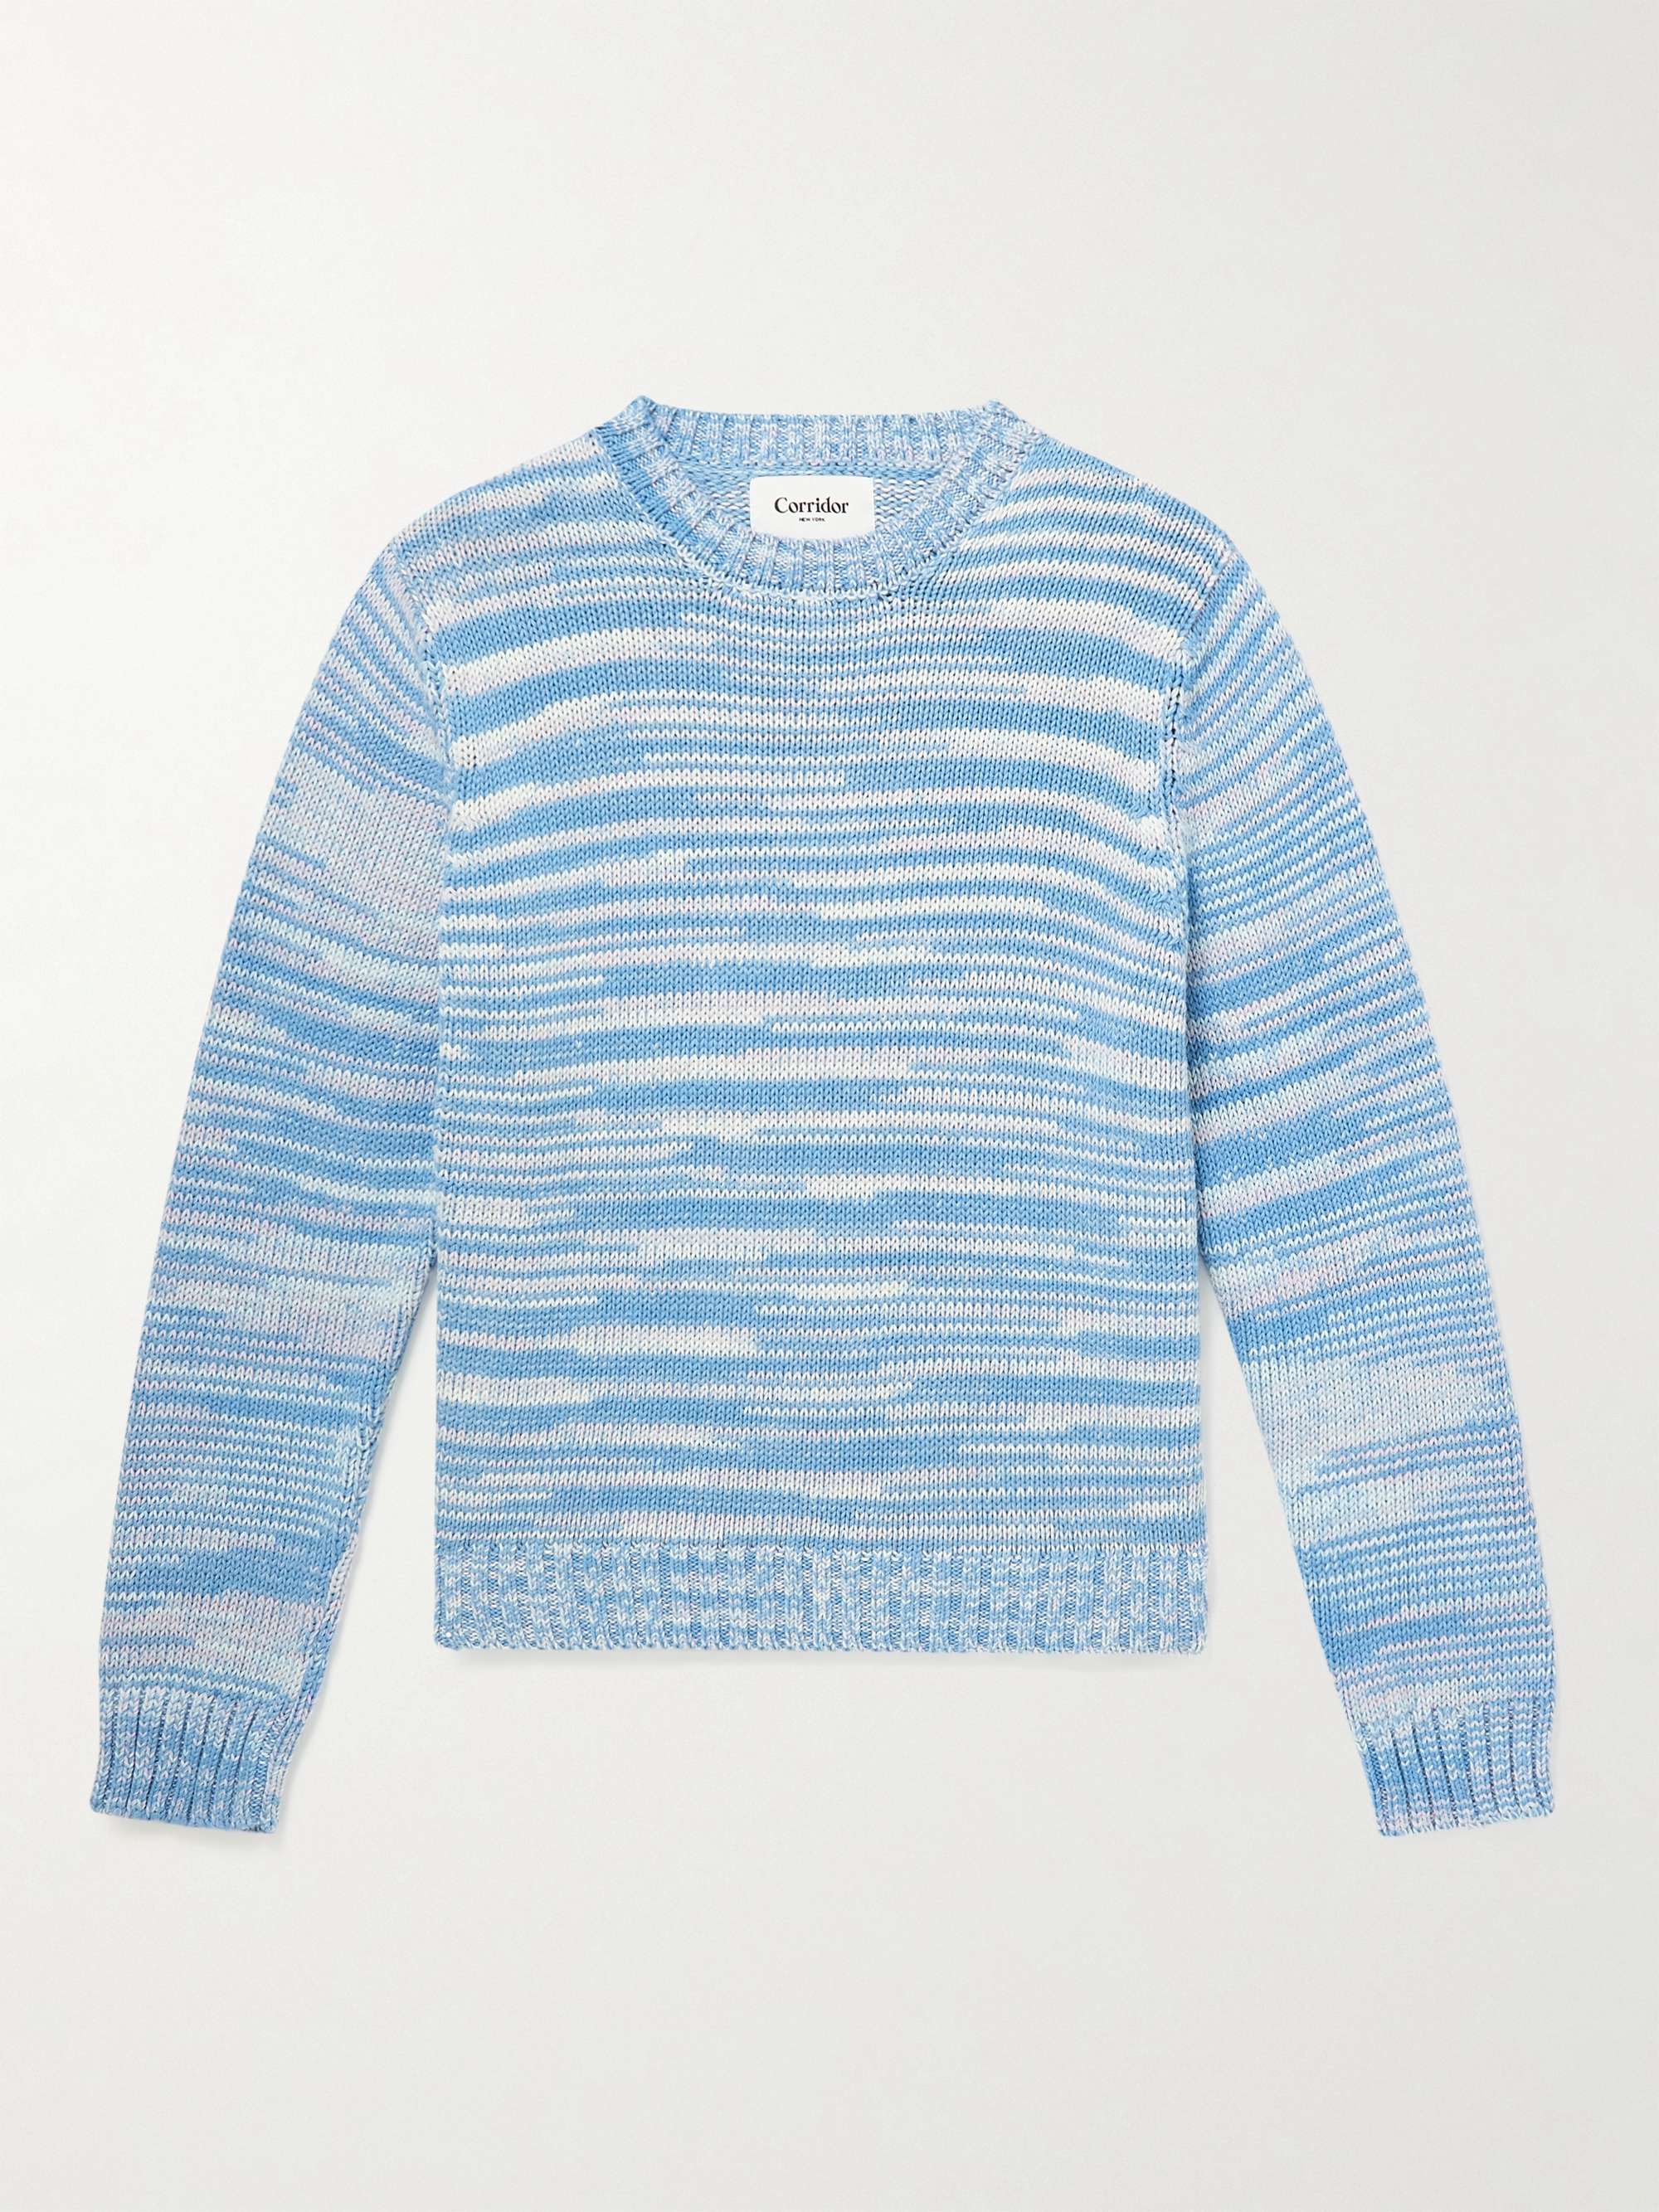 CORRIDOR Space-Dyed Cotton Sweater for Men | MR PORTER